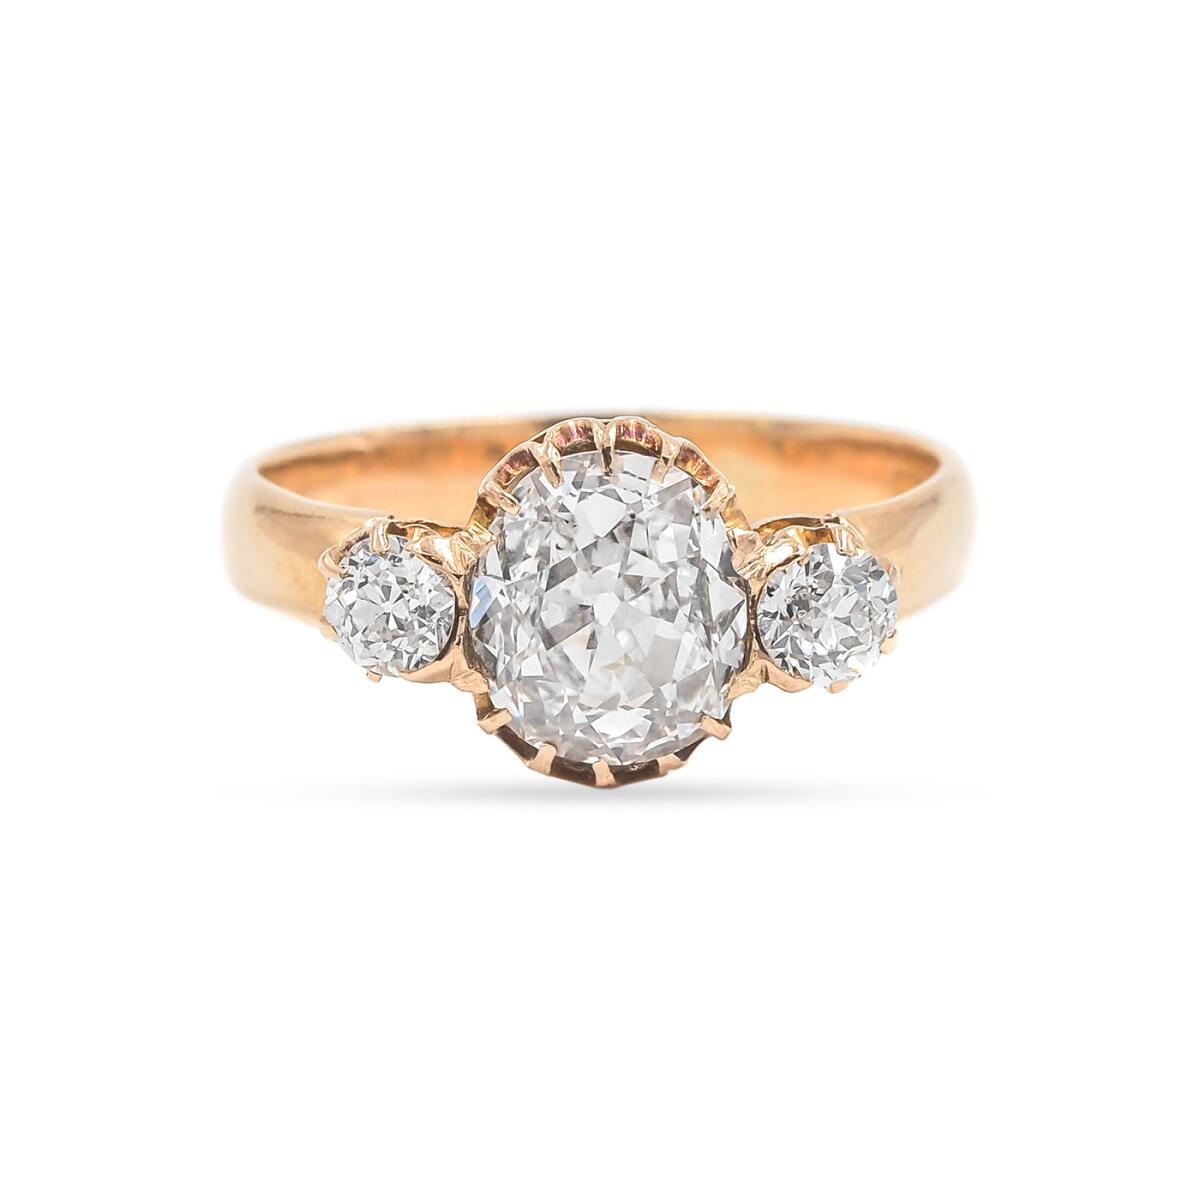 A gold and diamond ring from Platt Boutique Jewelry.